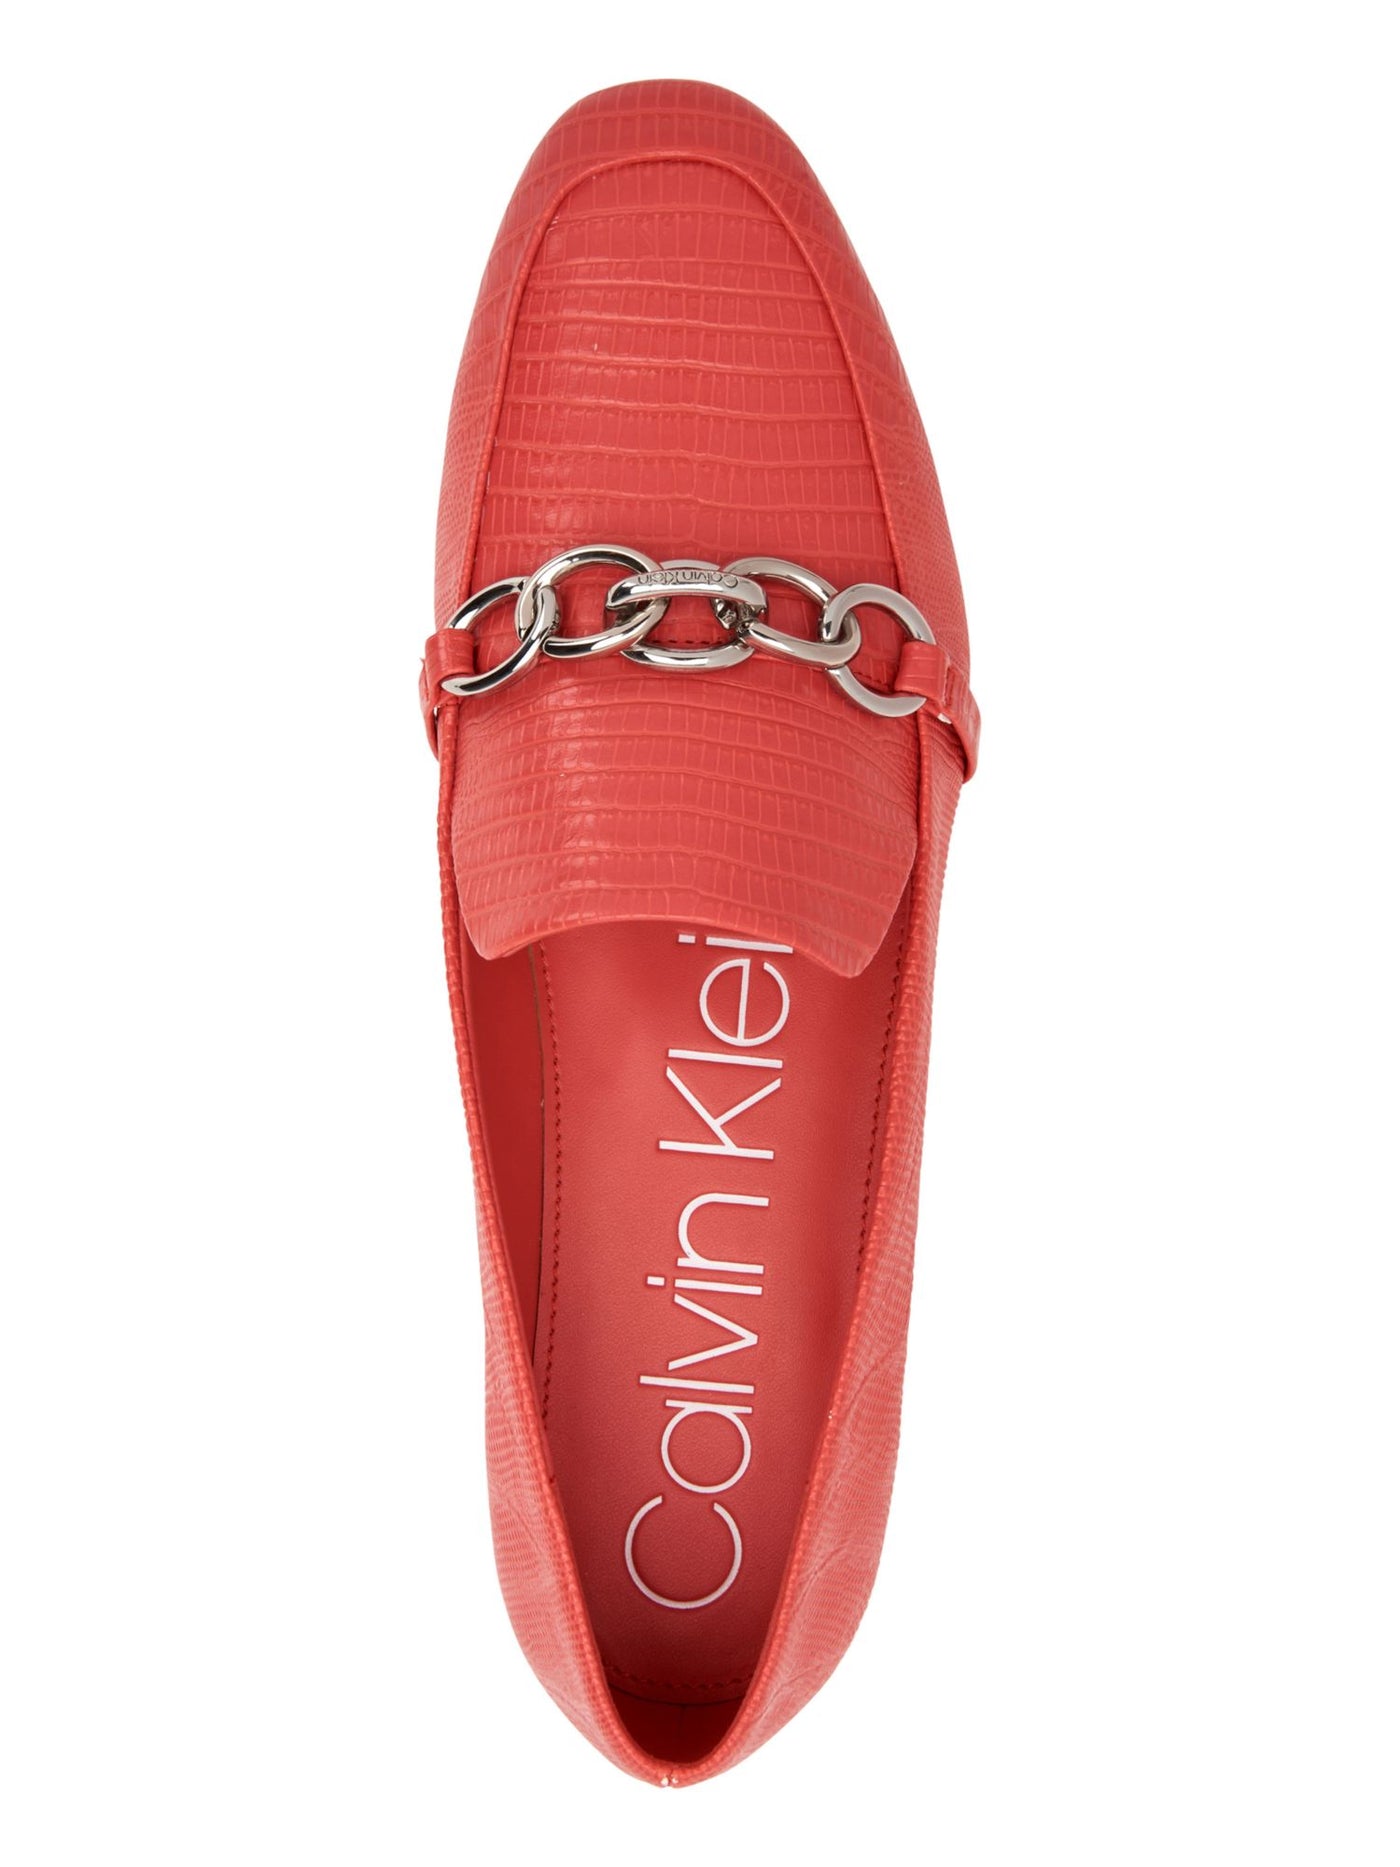 CALVIN KLEIN Womens Red Signature Chain Link Cushioned Logo Banda Round Toe Slip On Loafers Shoes 6.5 M